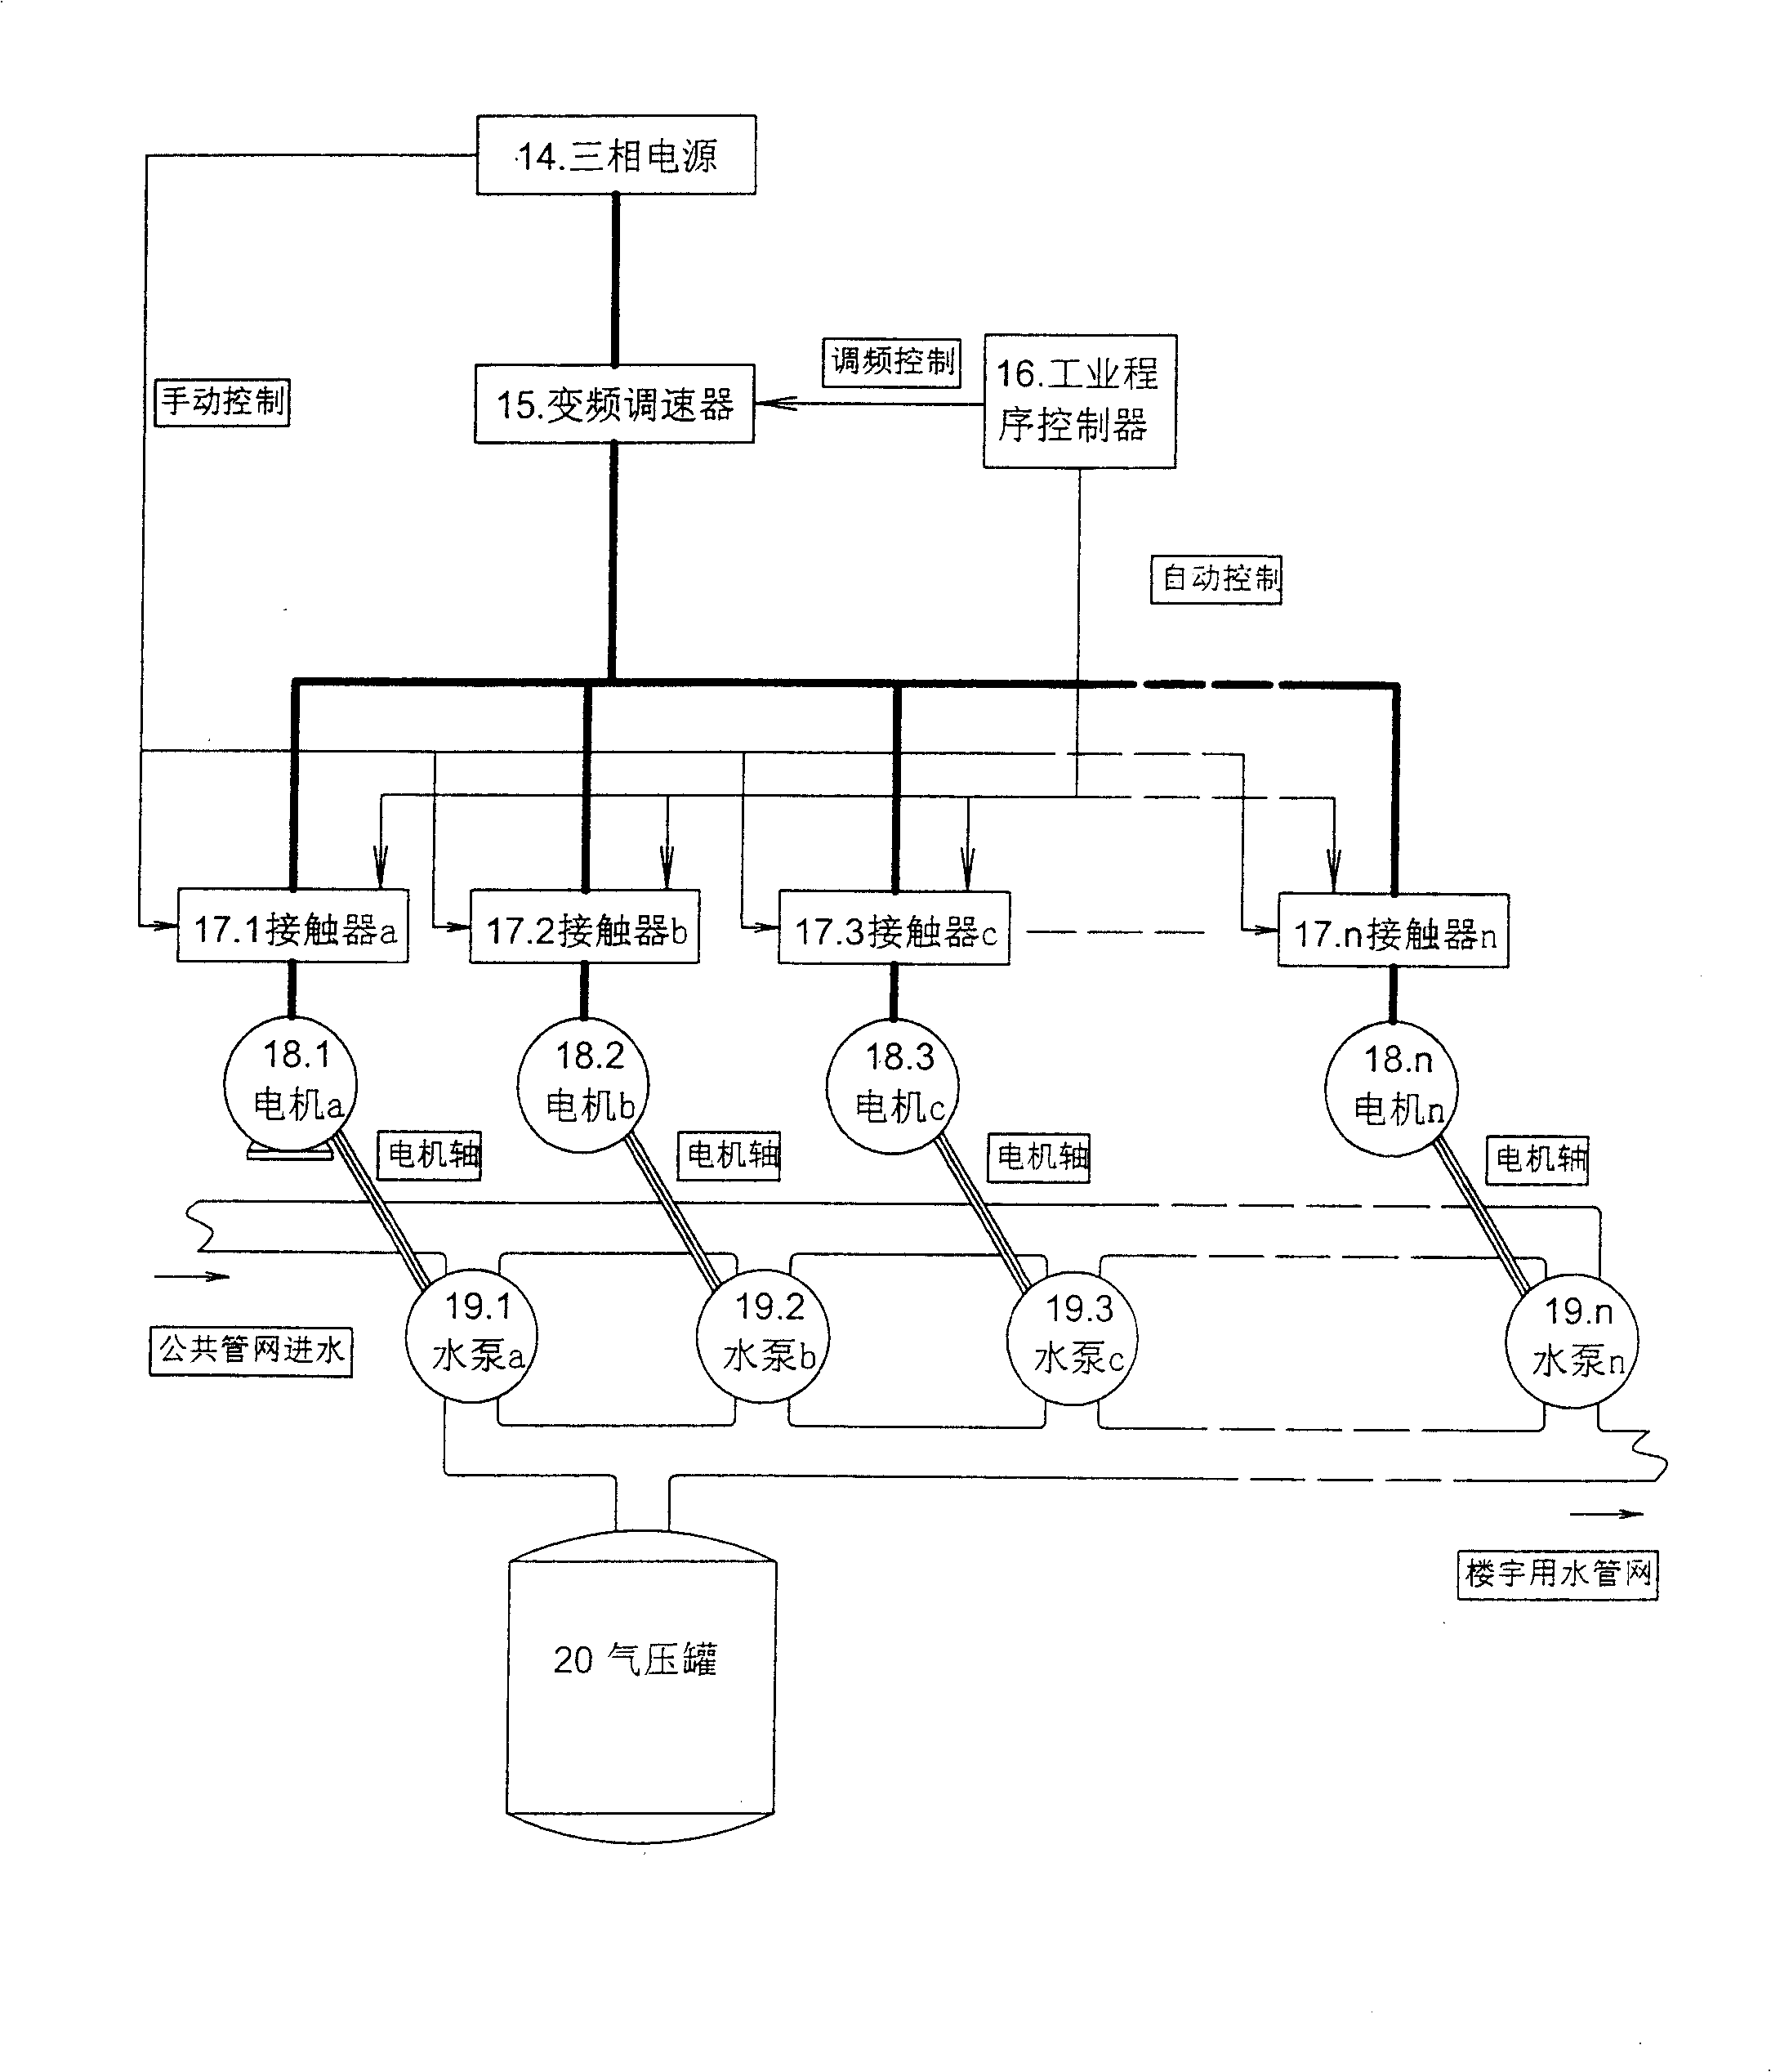 High-efficient frequency-variable and speed-adjusting water supplying method with total flow and supplying apparatus thereof